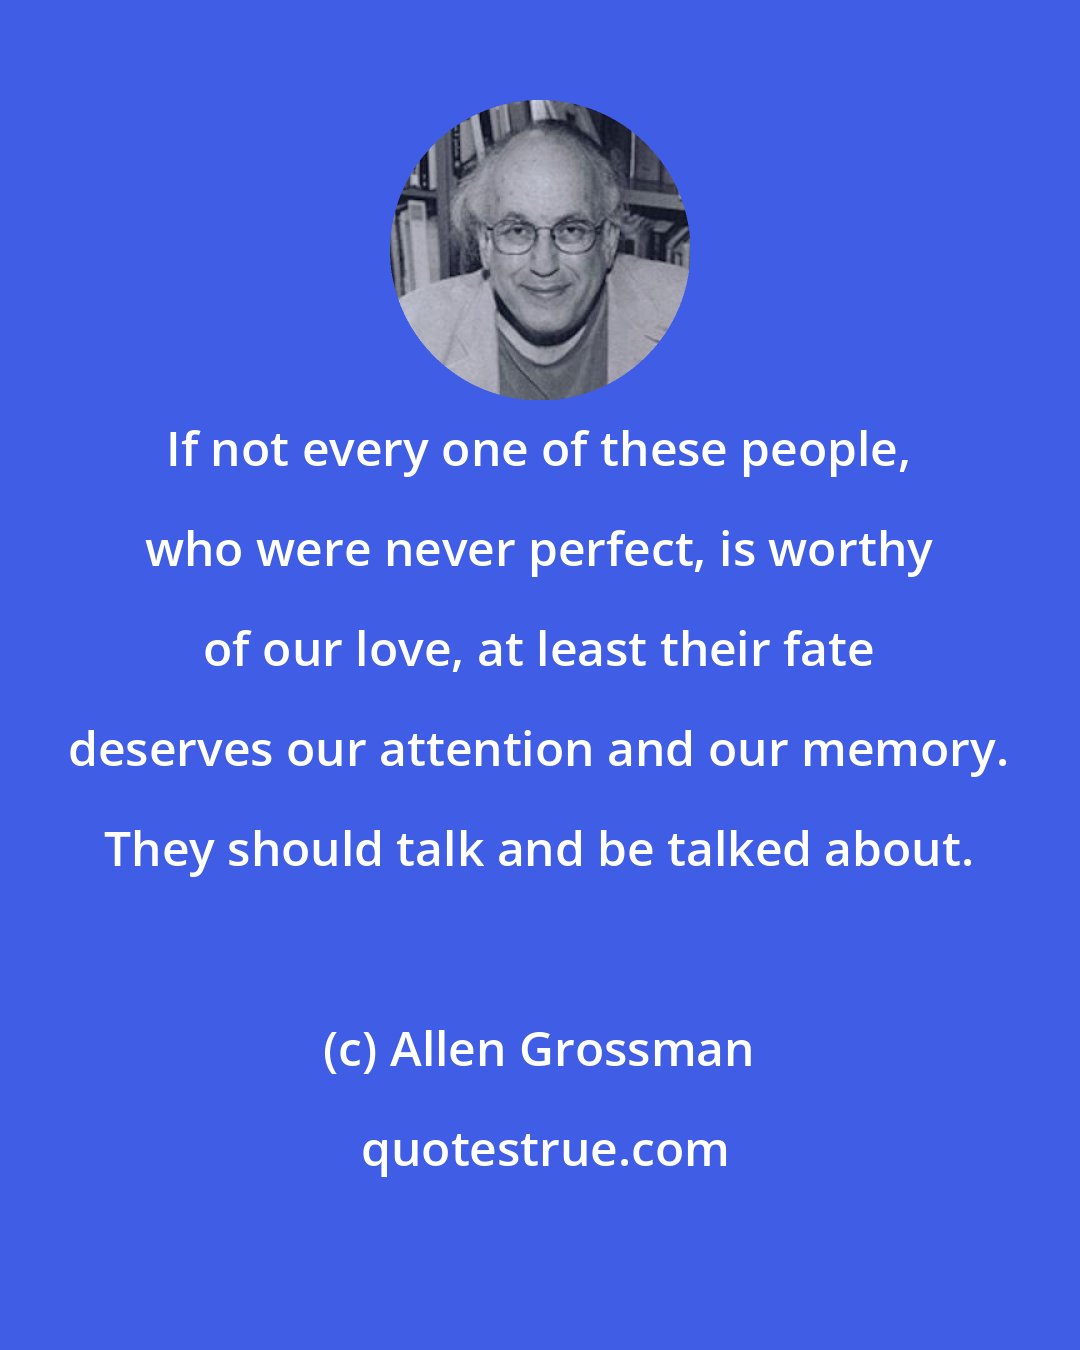 Allen Grossman: If not every one of these people, who were never perfect, is worthy of our love, at least their fate deserves our attention and our memory. They should talk and be talked about.